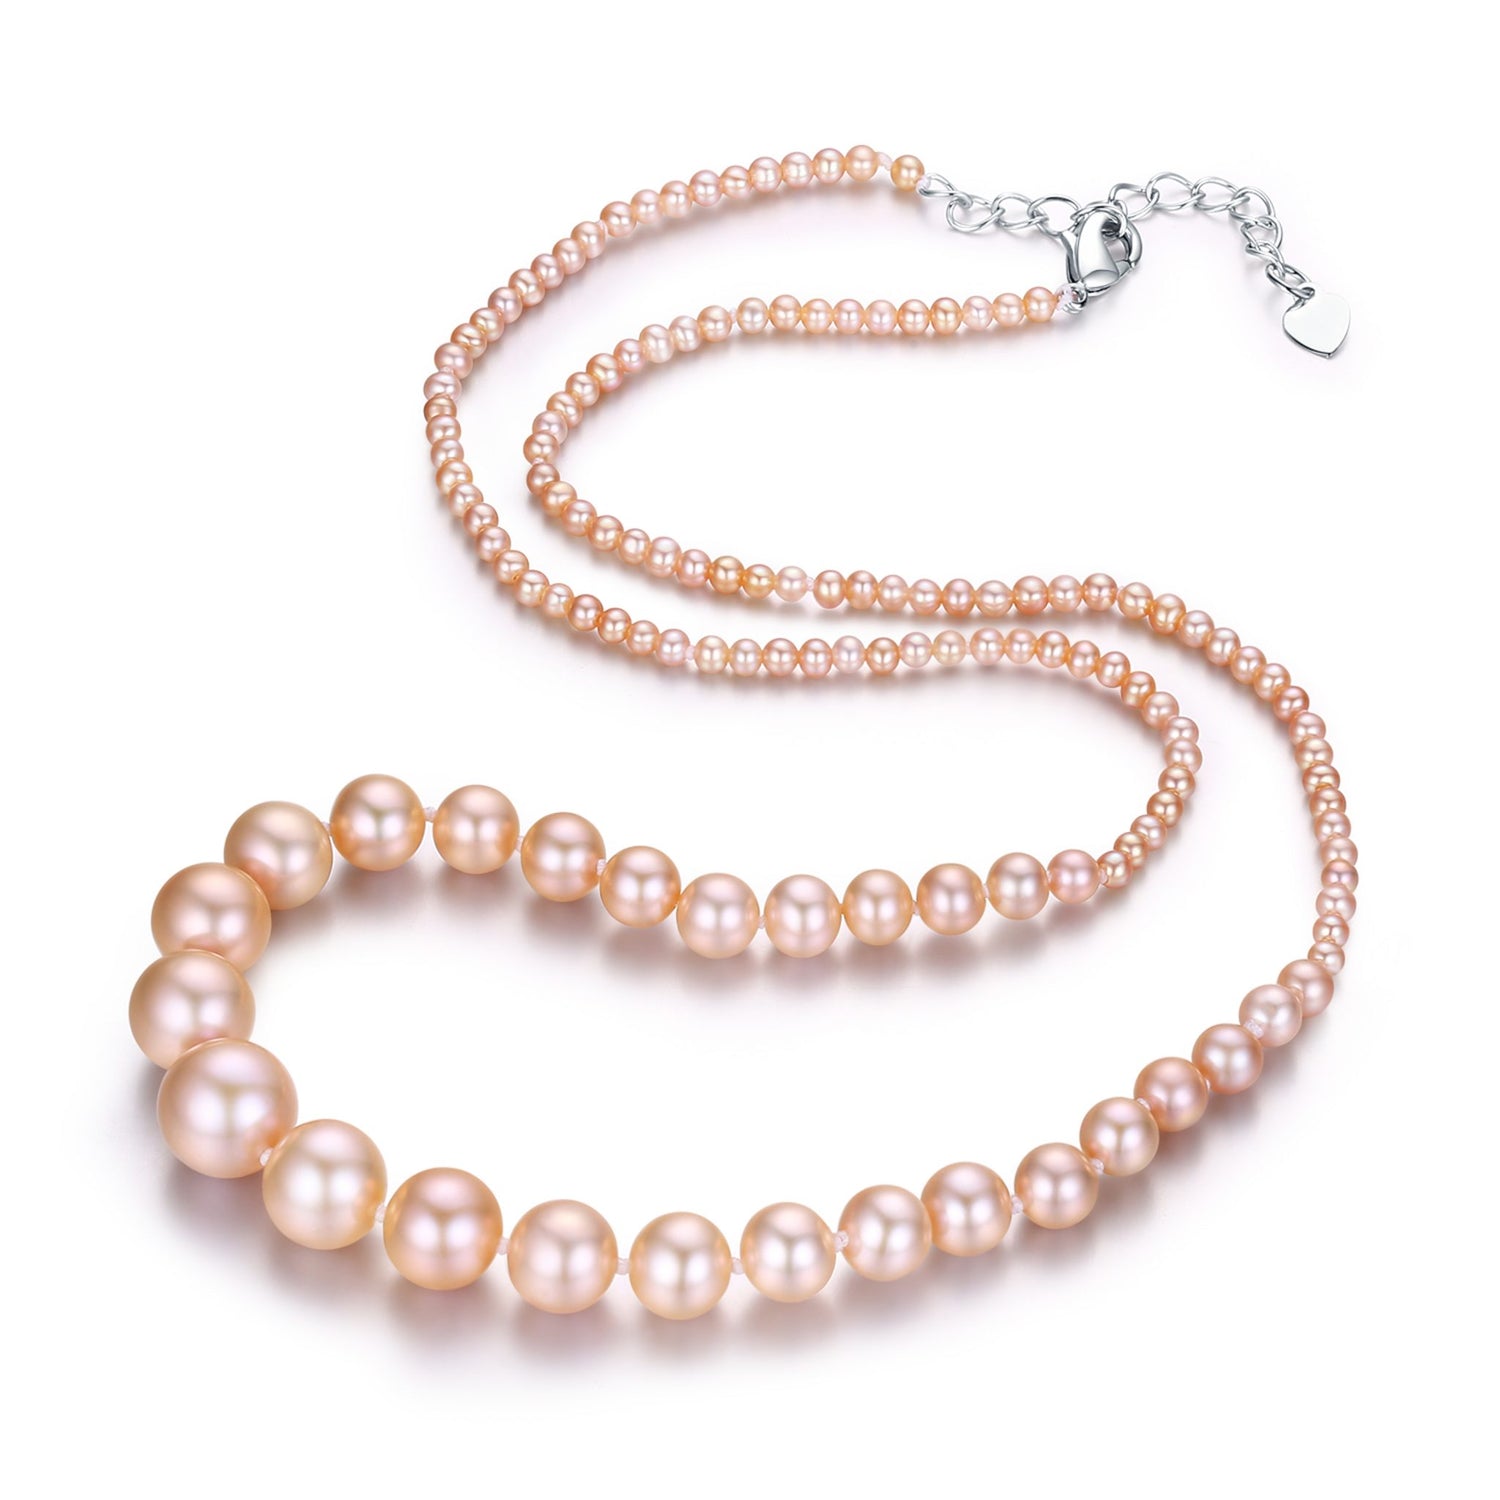 Empress Pearl Necklace - Timeless Pearl